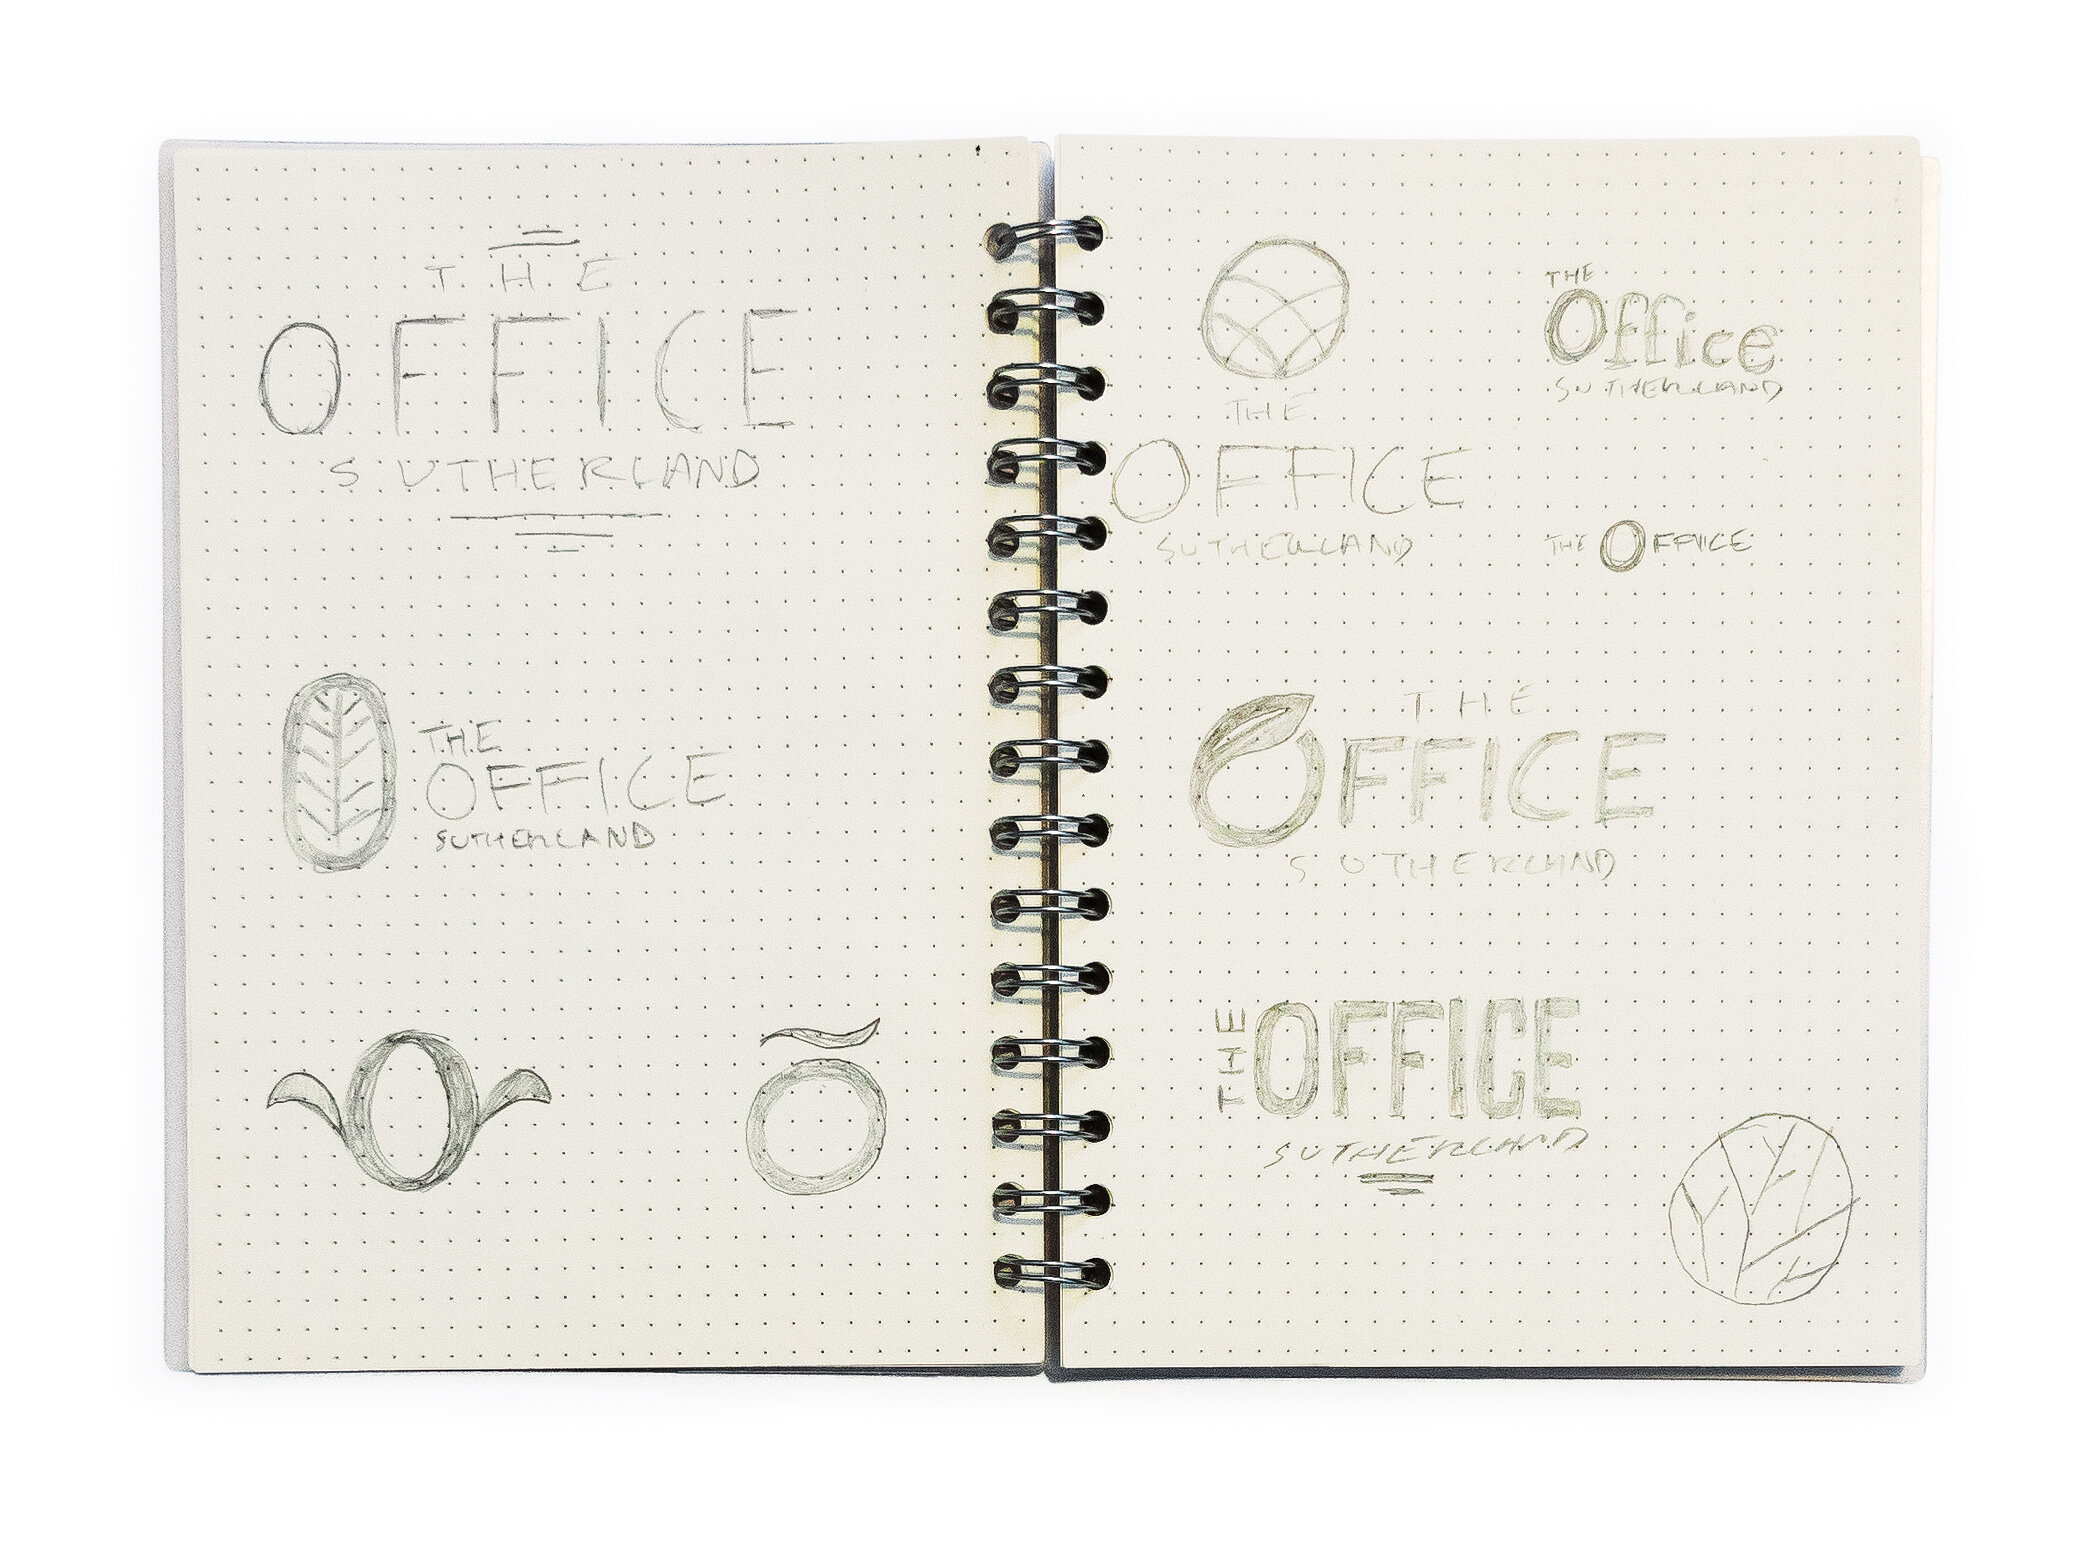 The-Office-Book-Sketches2.jpg